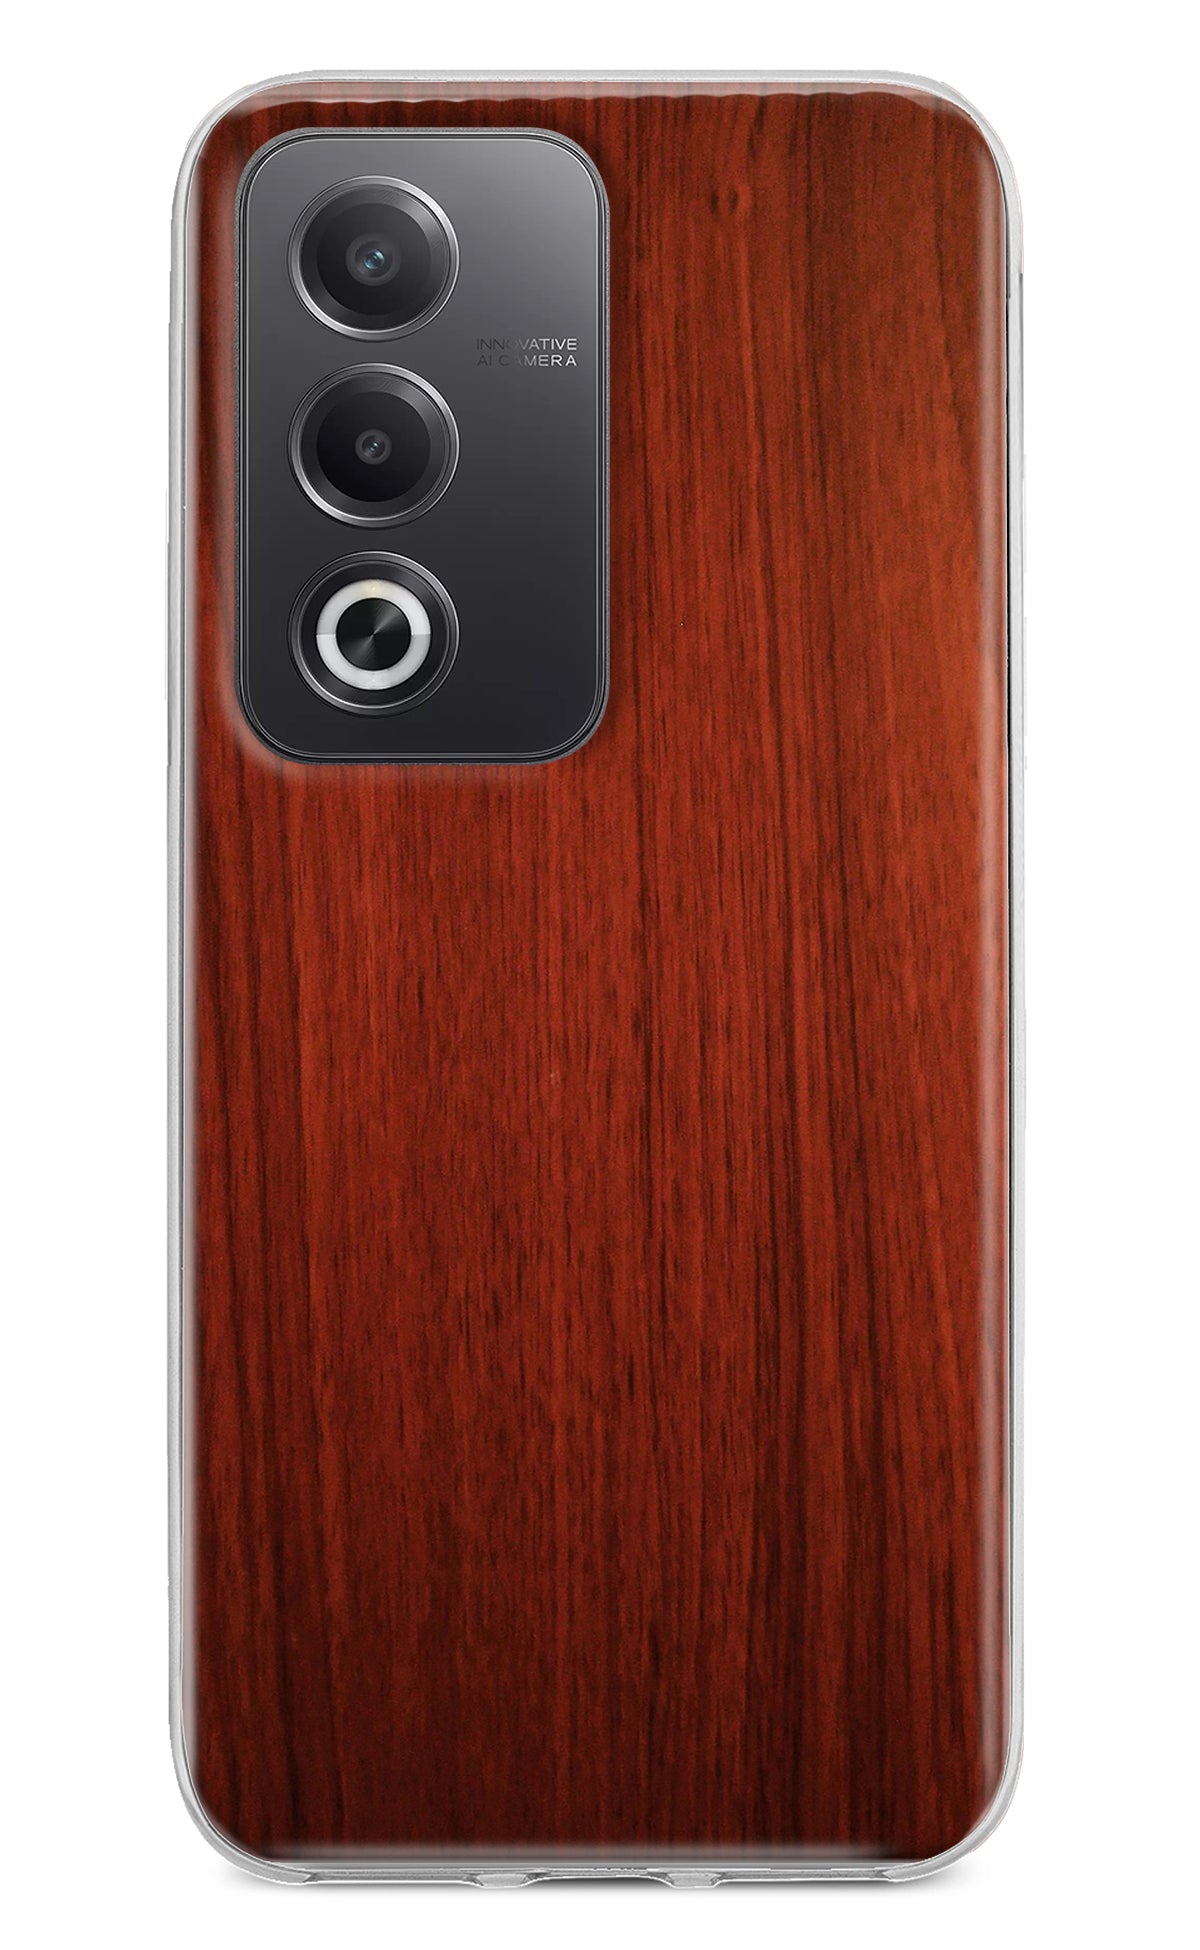 Wooden Plain Pattern Oppo A3 Pro 5G Back Cover